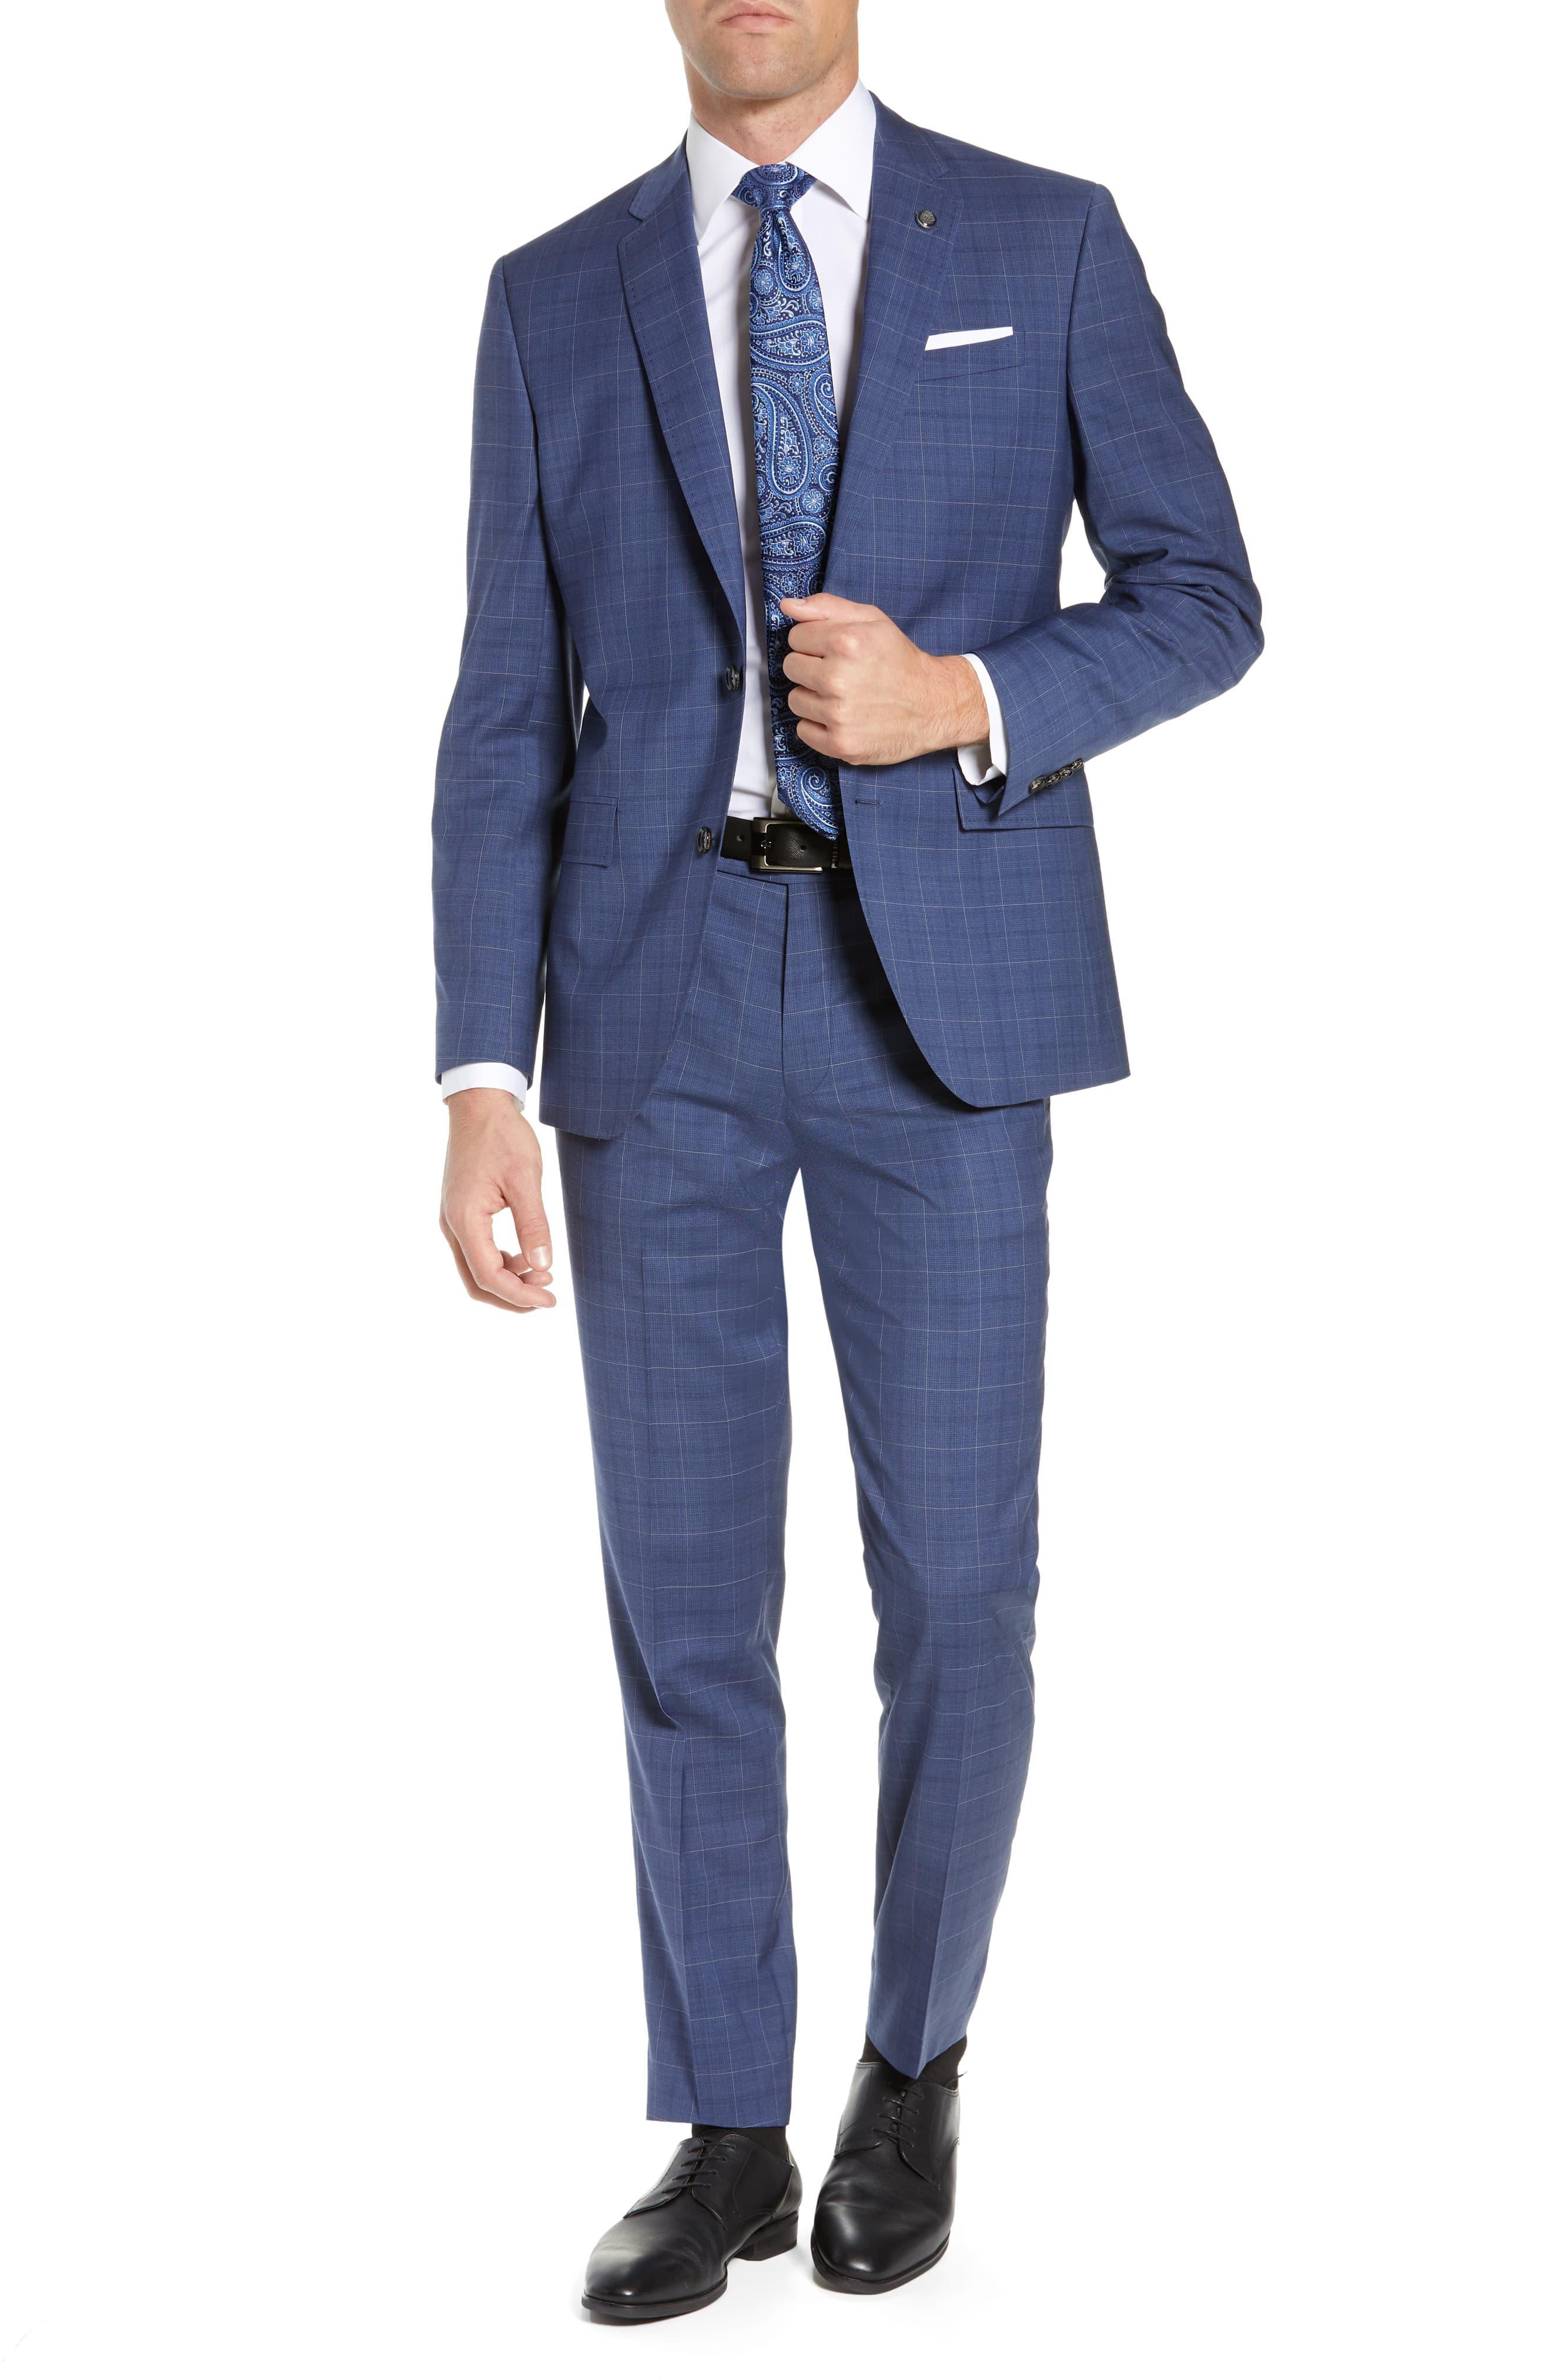 Ted Baker Jay Trim Fit Windowpane Wool Suit in Blue for Men - Lyst